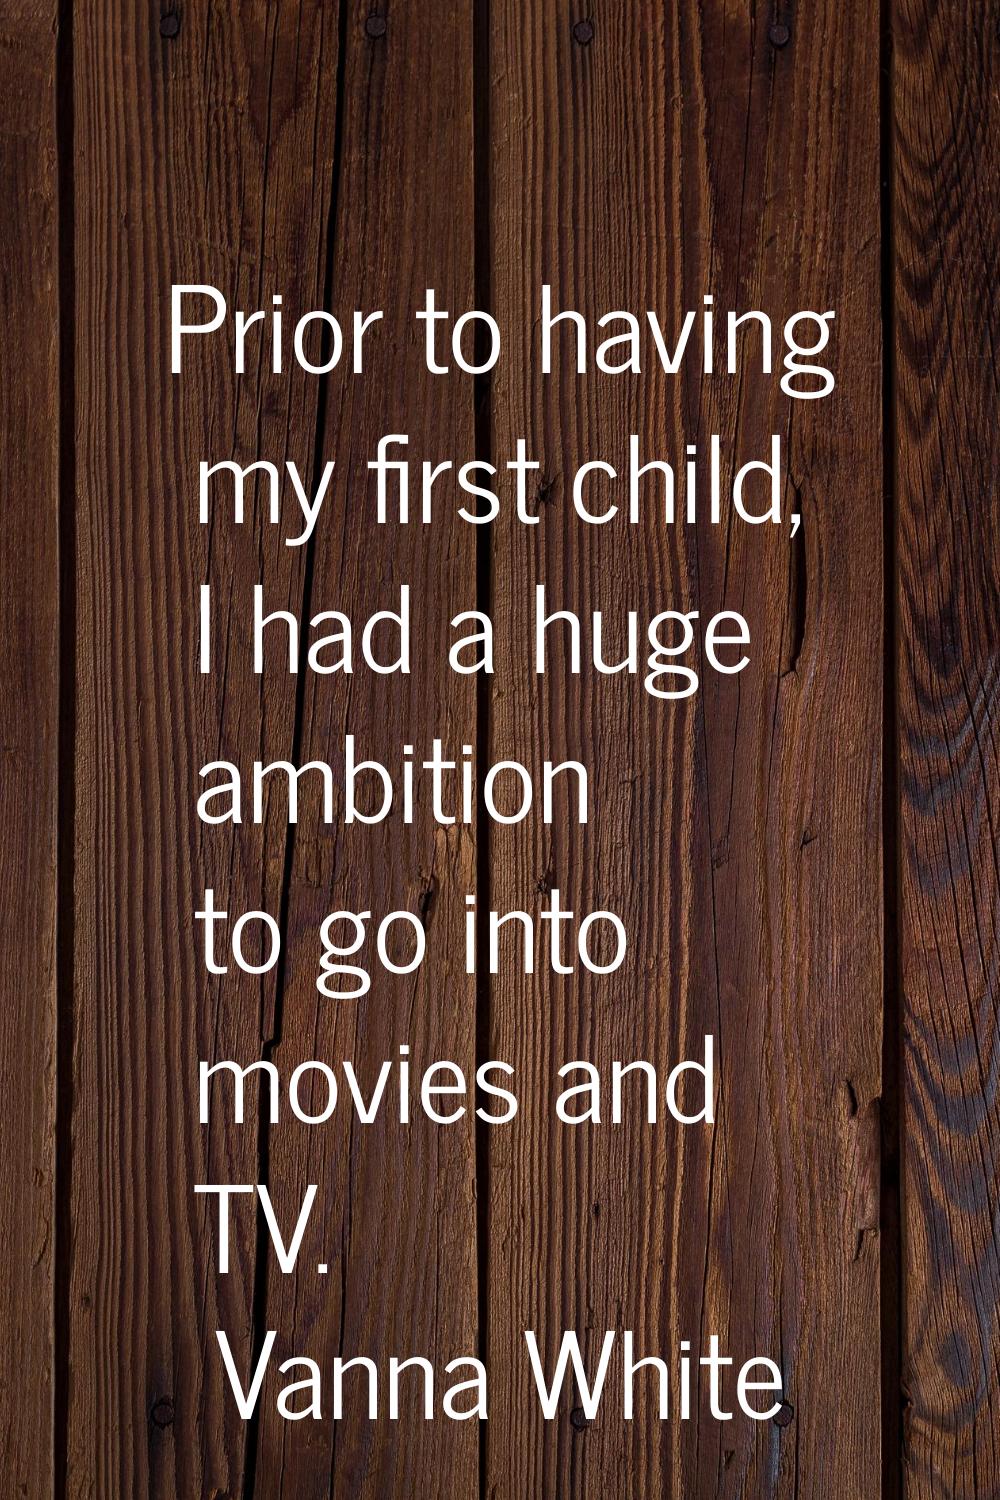 Prior to having my first child, I had a huge ambition to go into movies and TV.